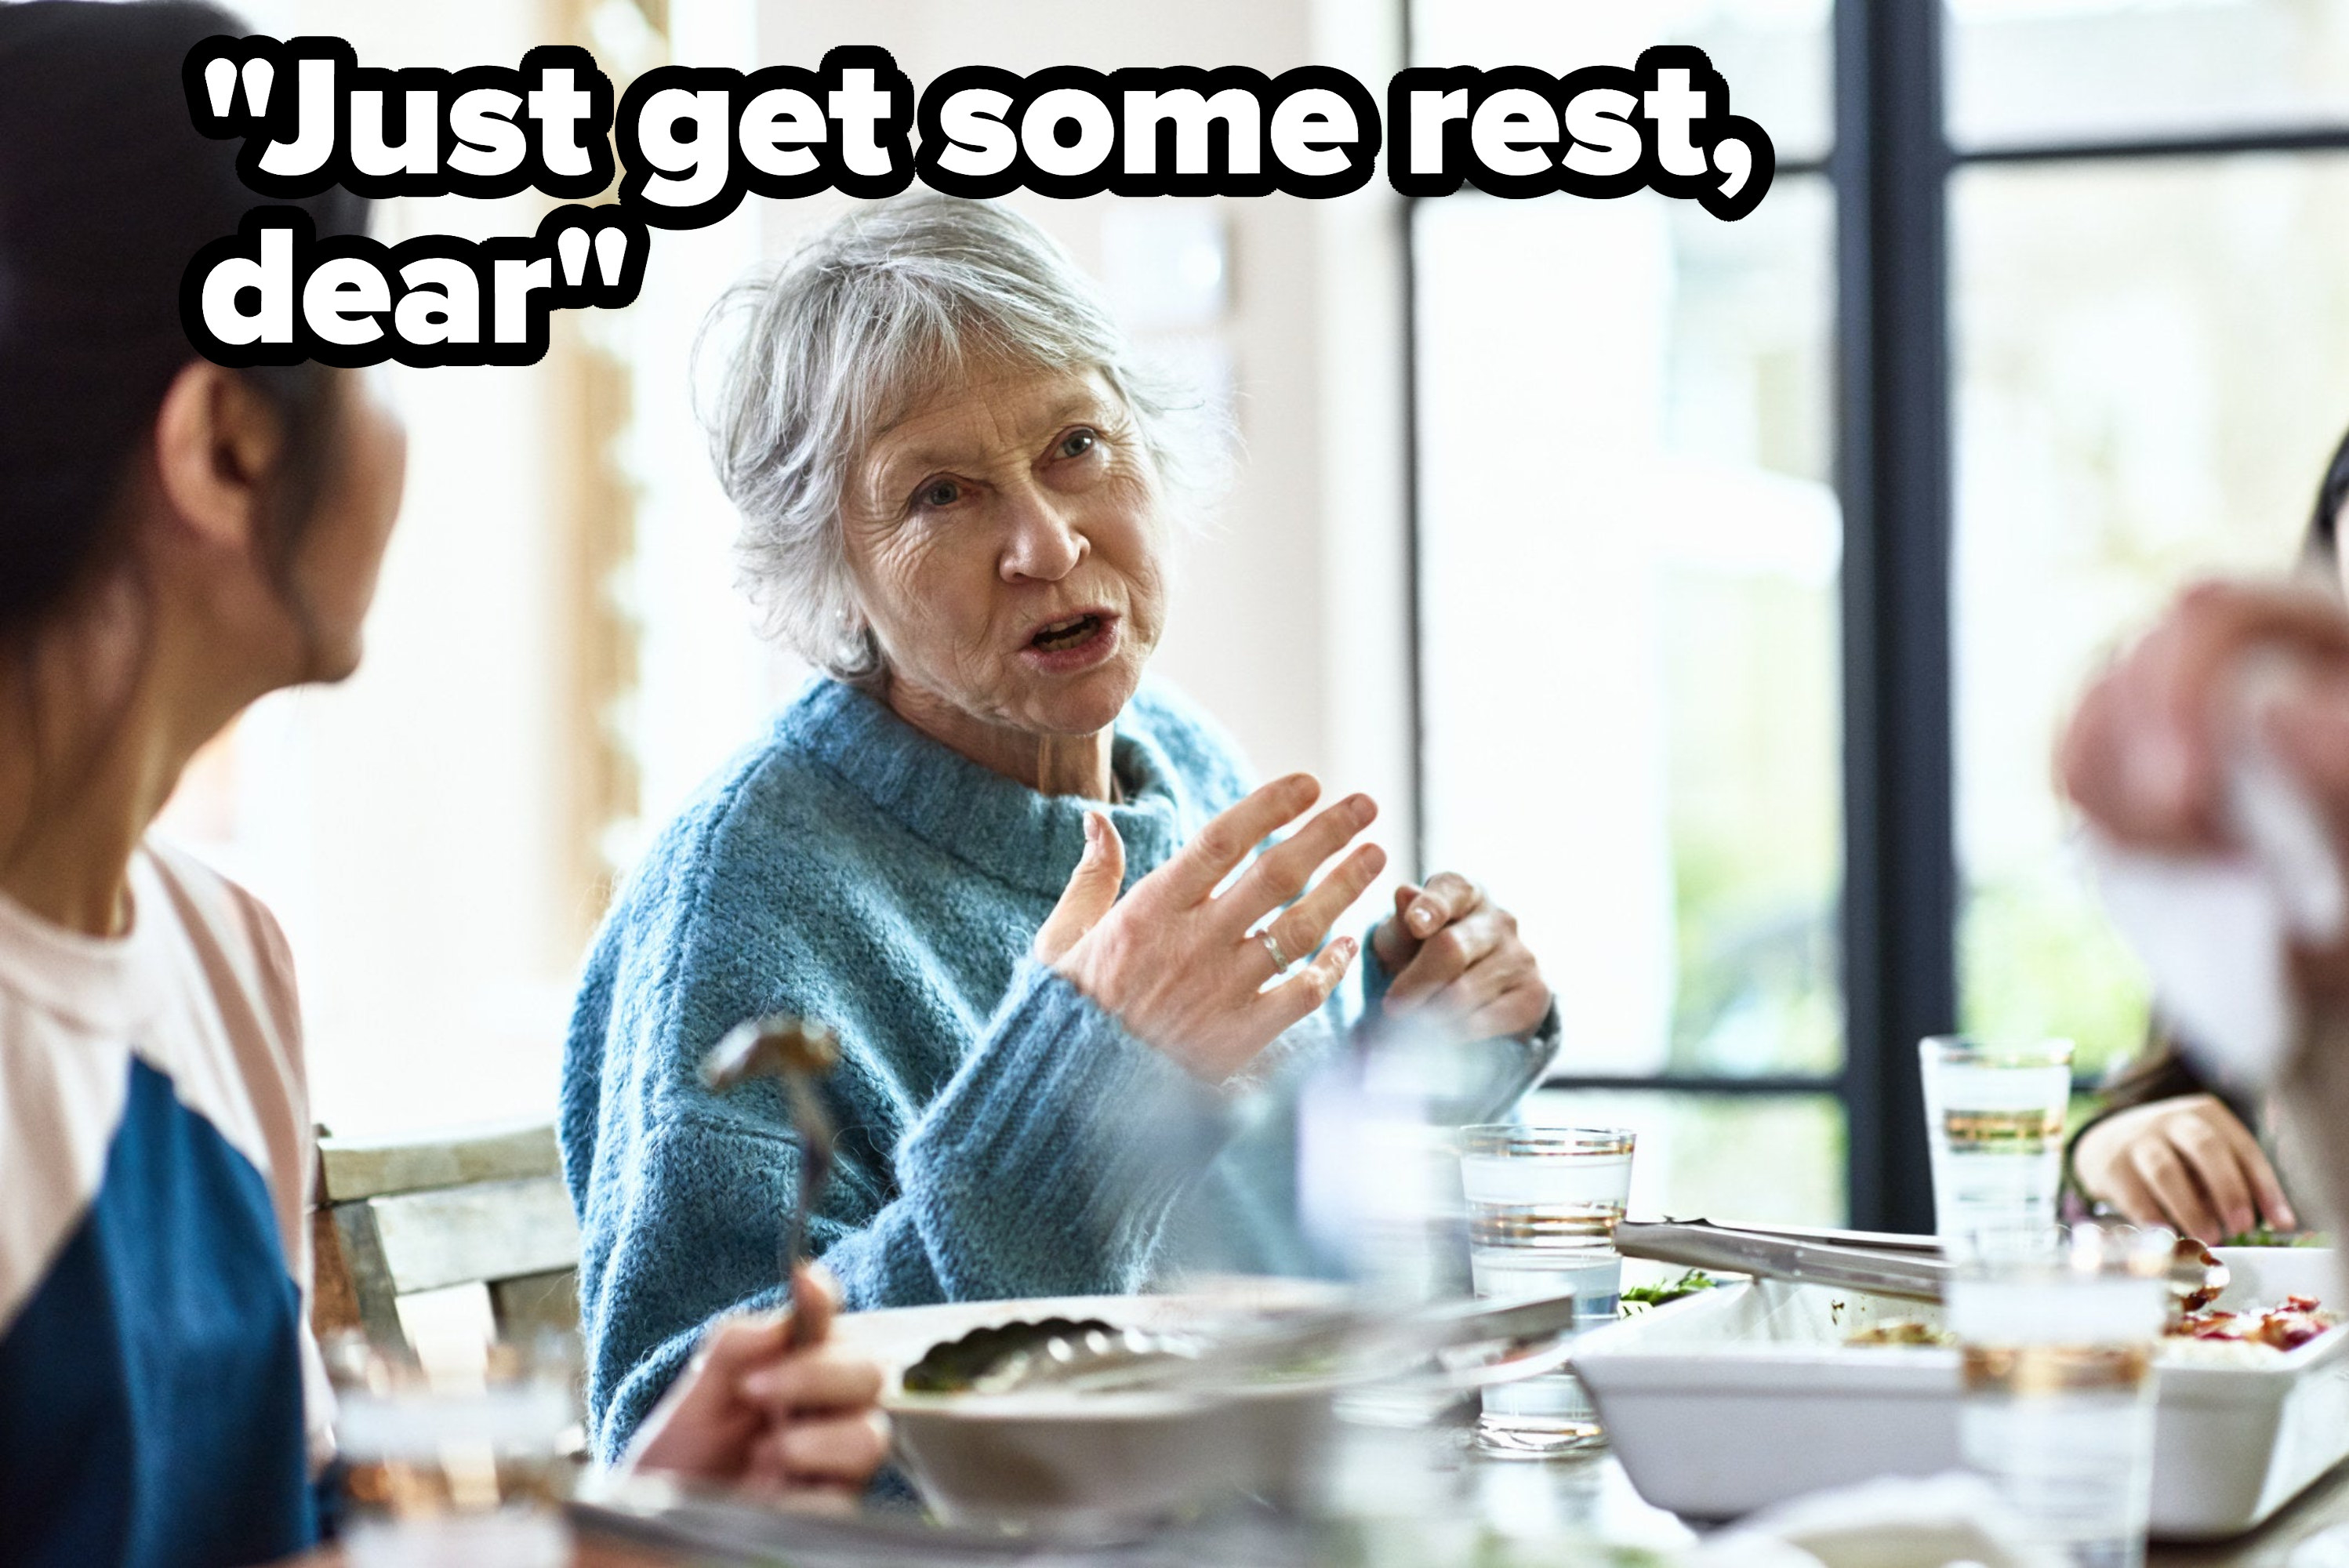 an old woman saying just get some rest